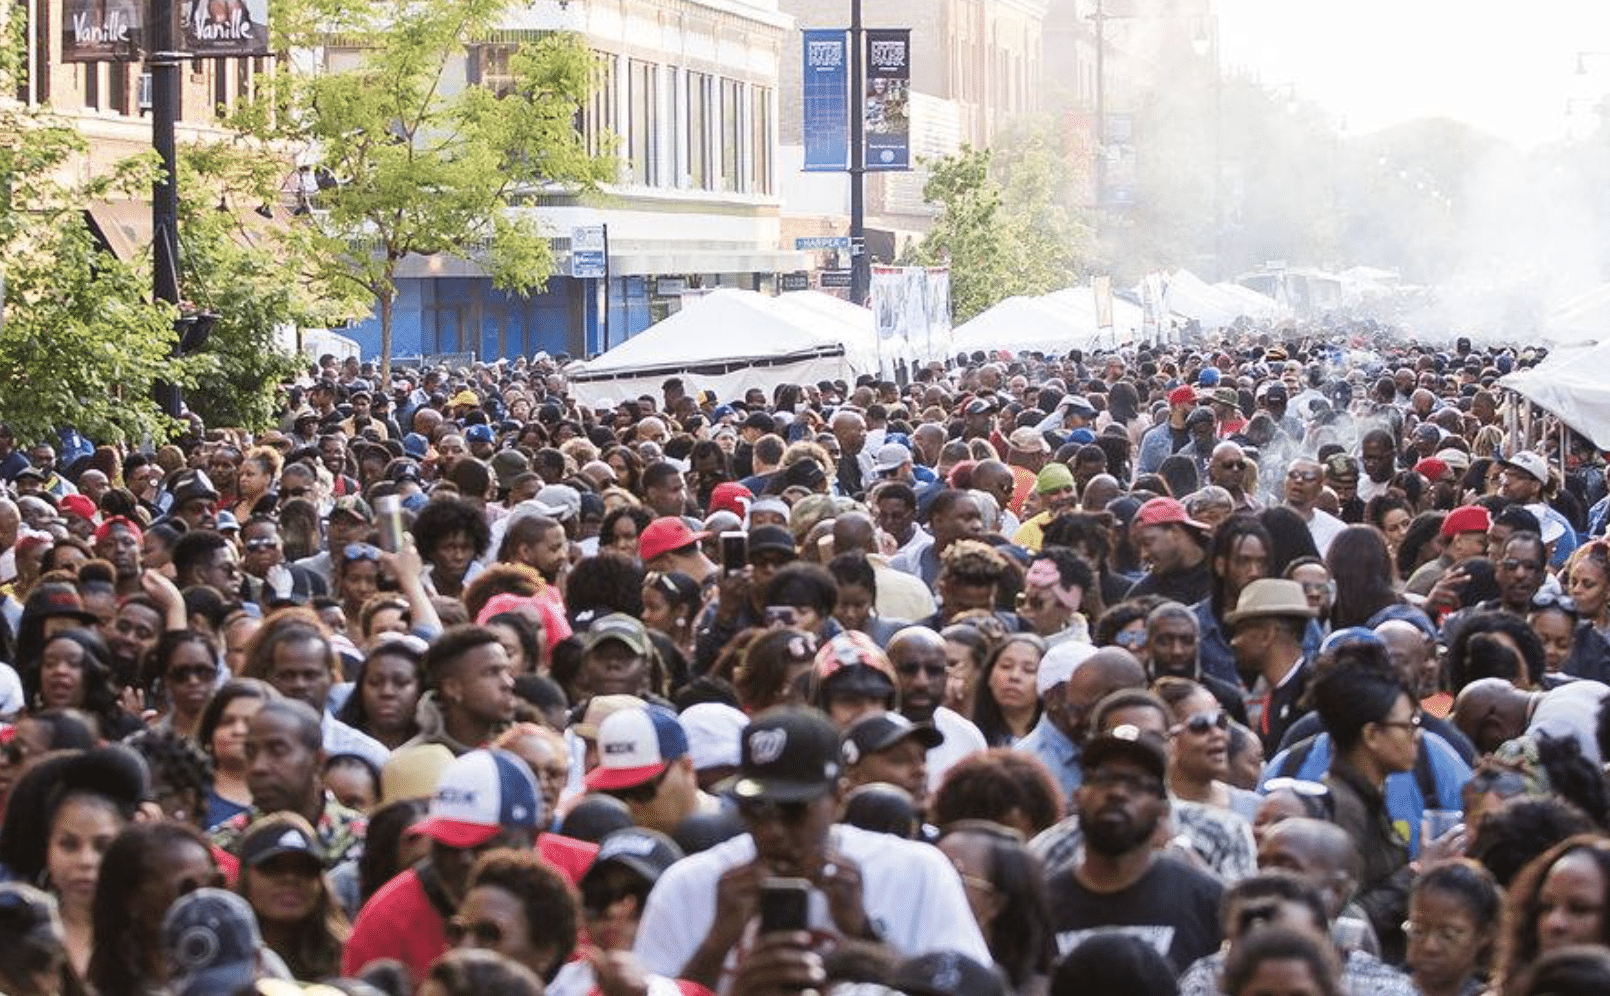 large crowd gathered on the street in hyde park at a festival in chicago